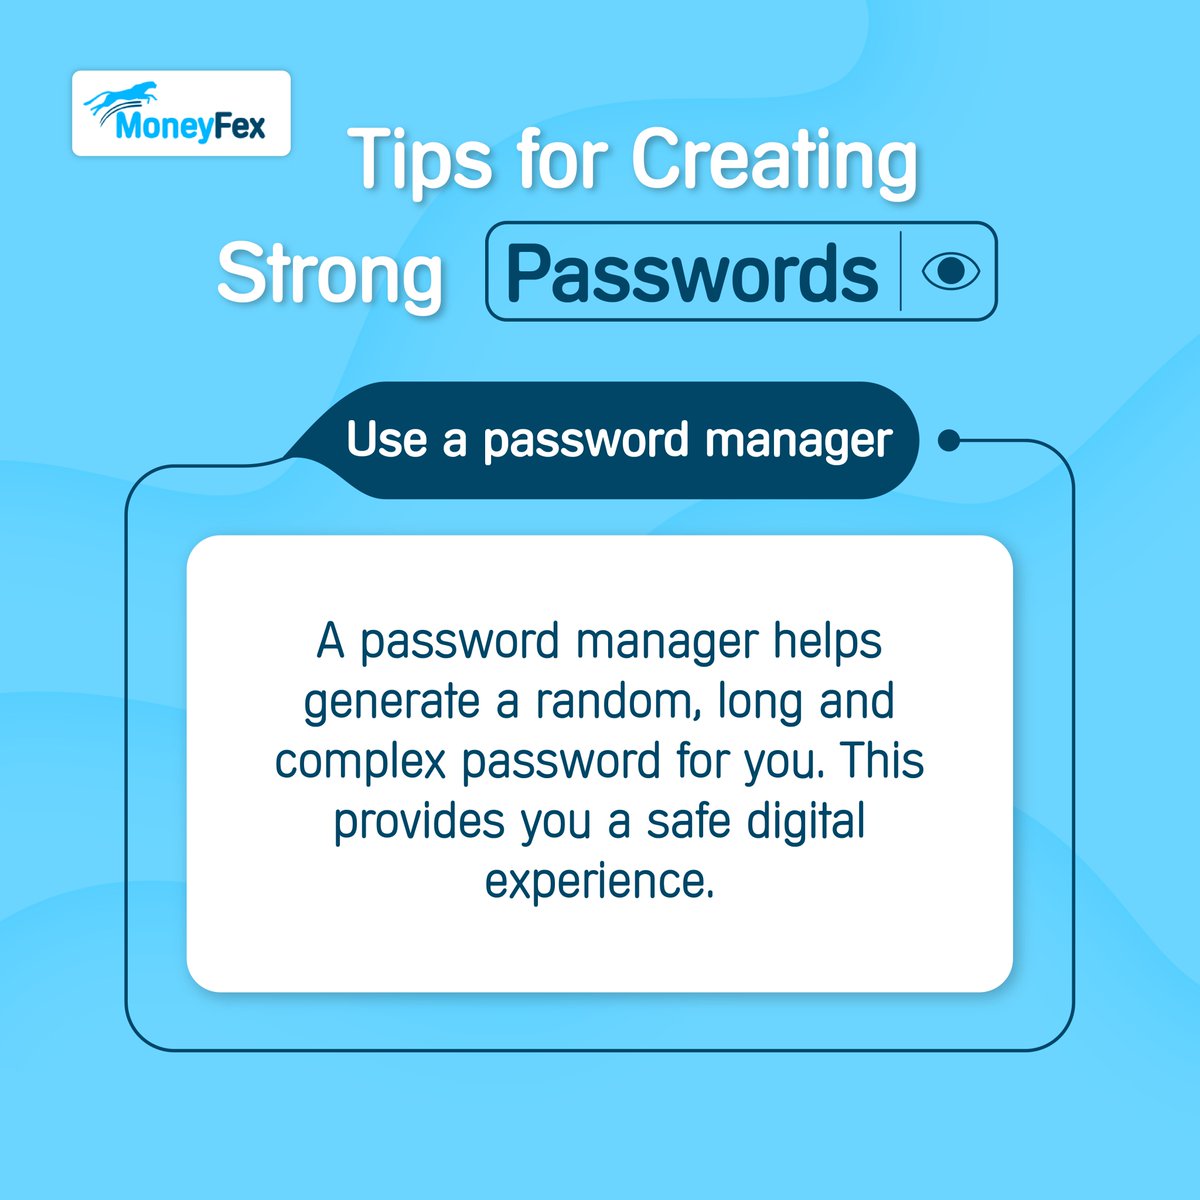 Protect your digital experience with a password manager that can help you generate random, long, and complex passwords.👨‍💻🔒

#OnlineSafety #moneyfex #fintech #technology #currencyexchange #africa